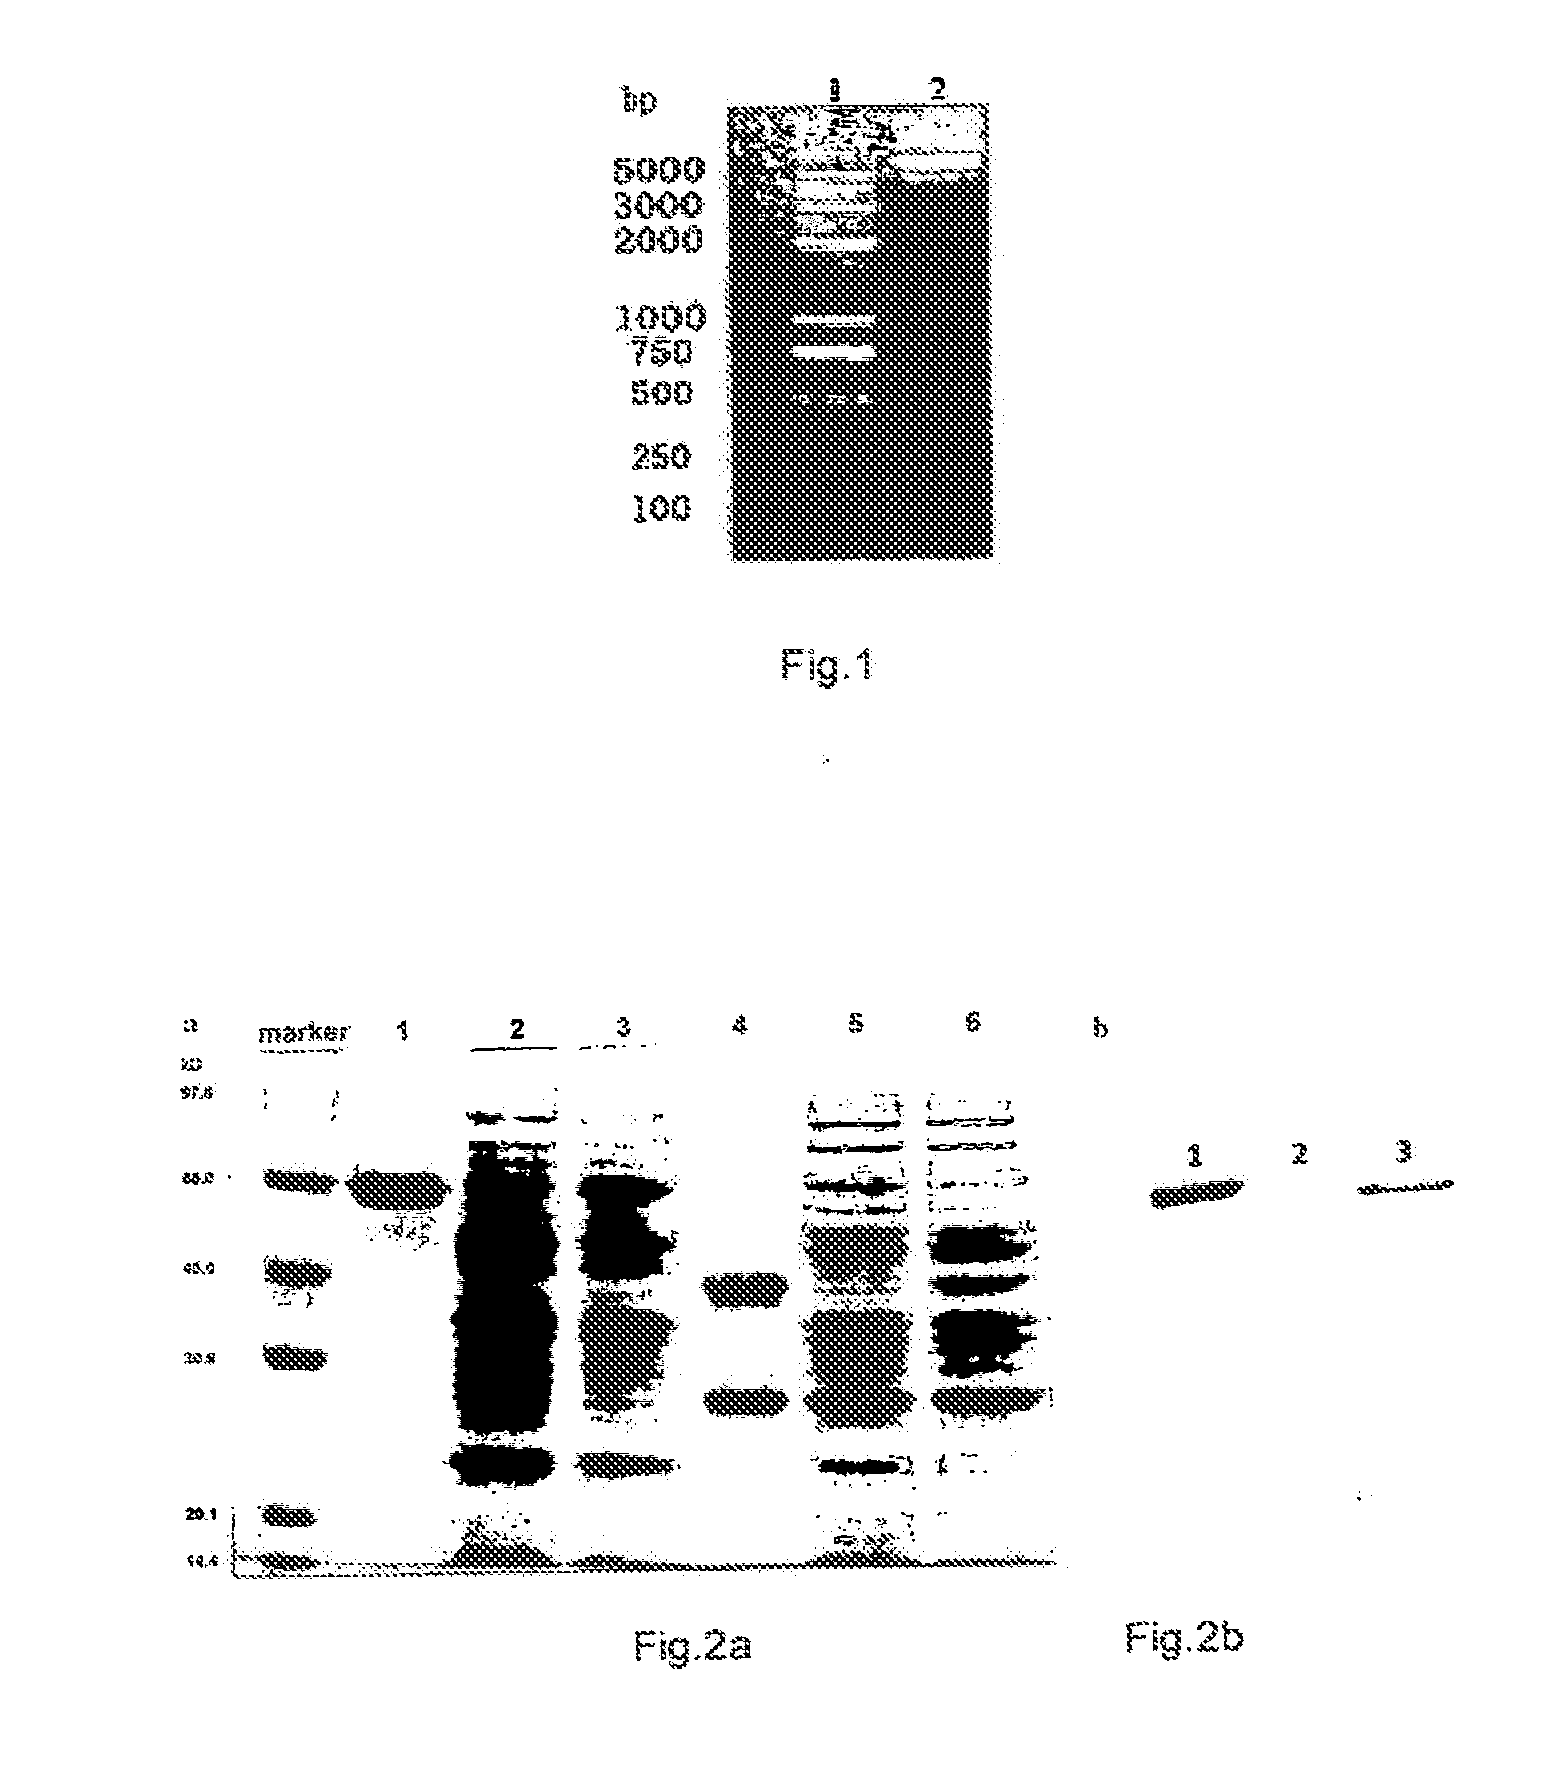  Fusion Protein of an Anti-CD20 Antibody Fab Fragment and Lidamycin, a Method for Preparing the Same, and the Use Thereof